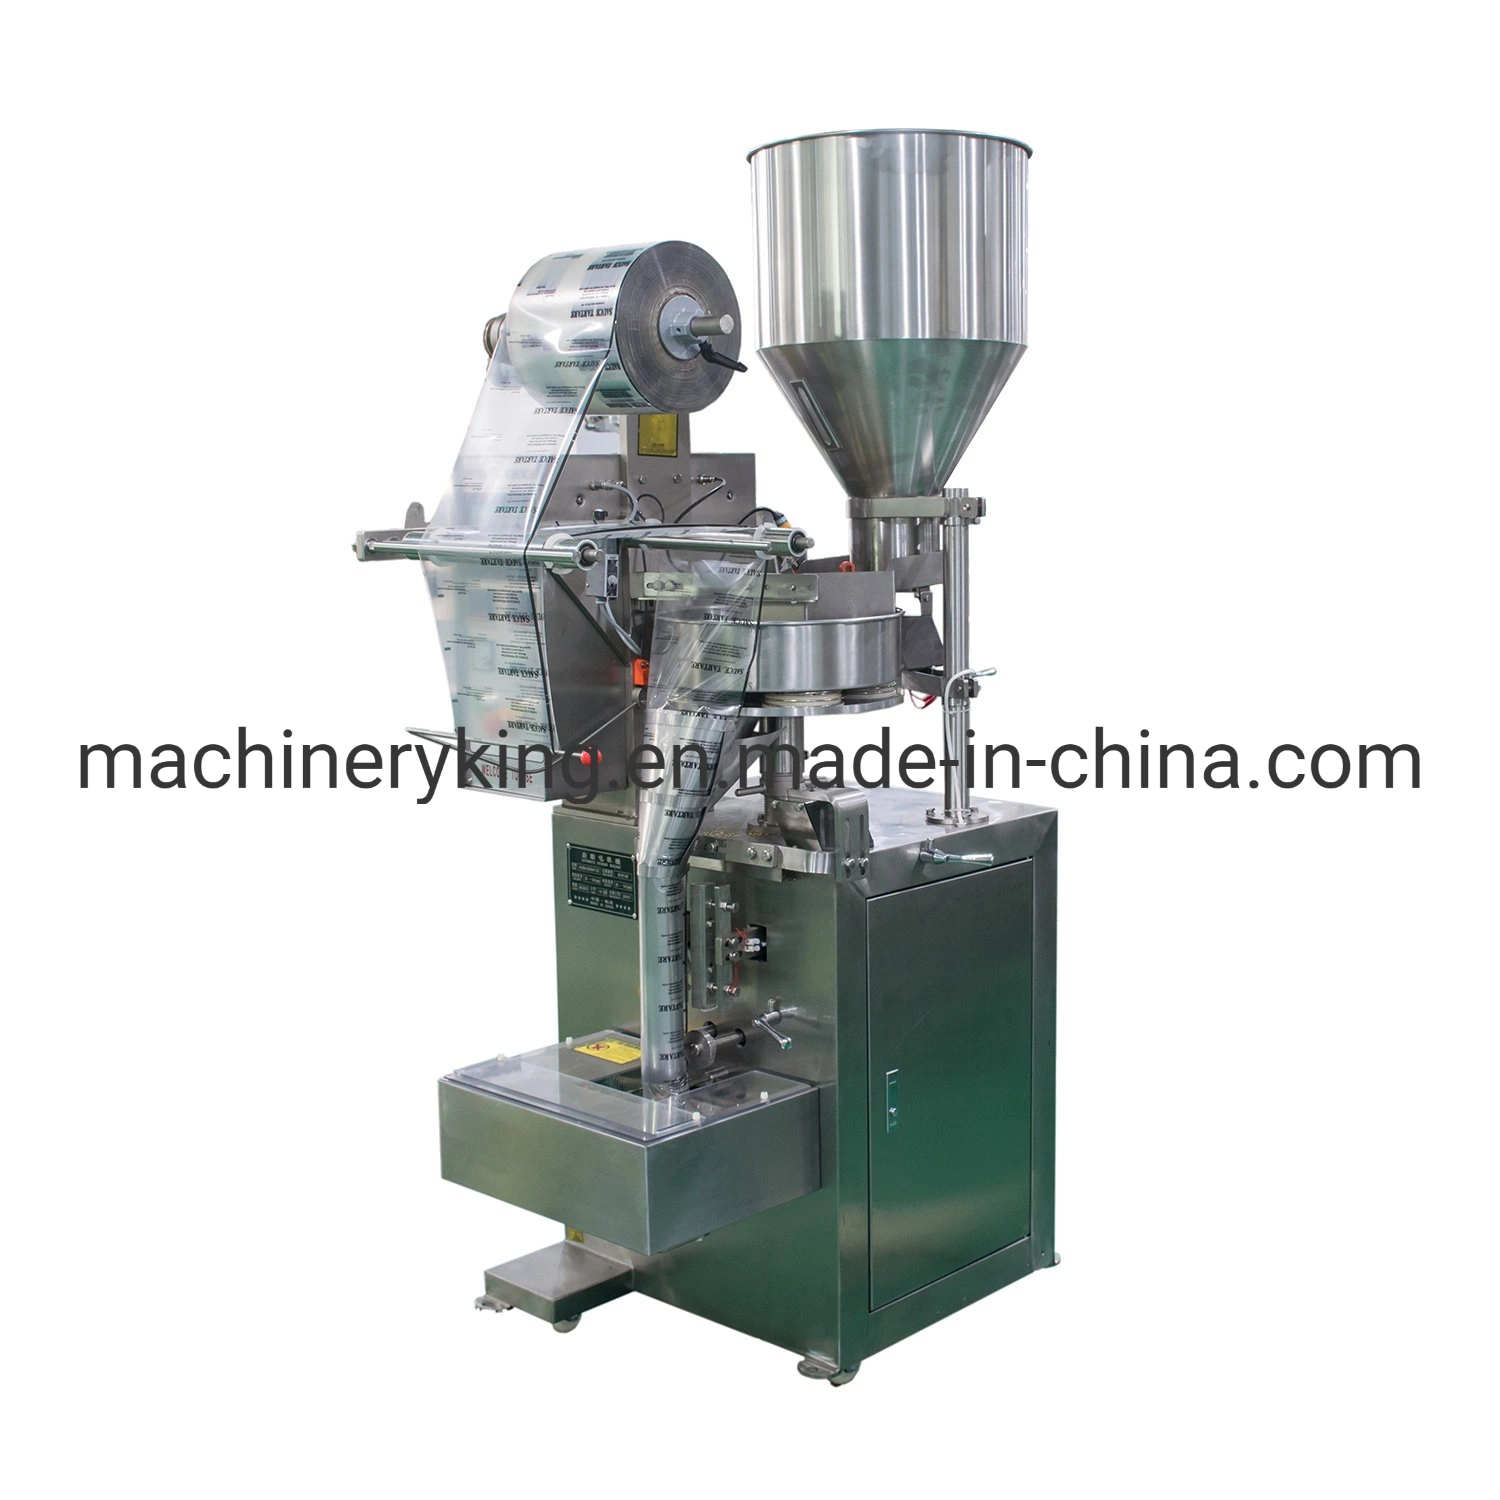 Factory Price 3 in 1 Automatic Milk Powder Packing Machine